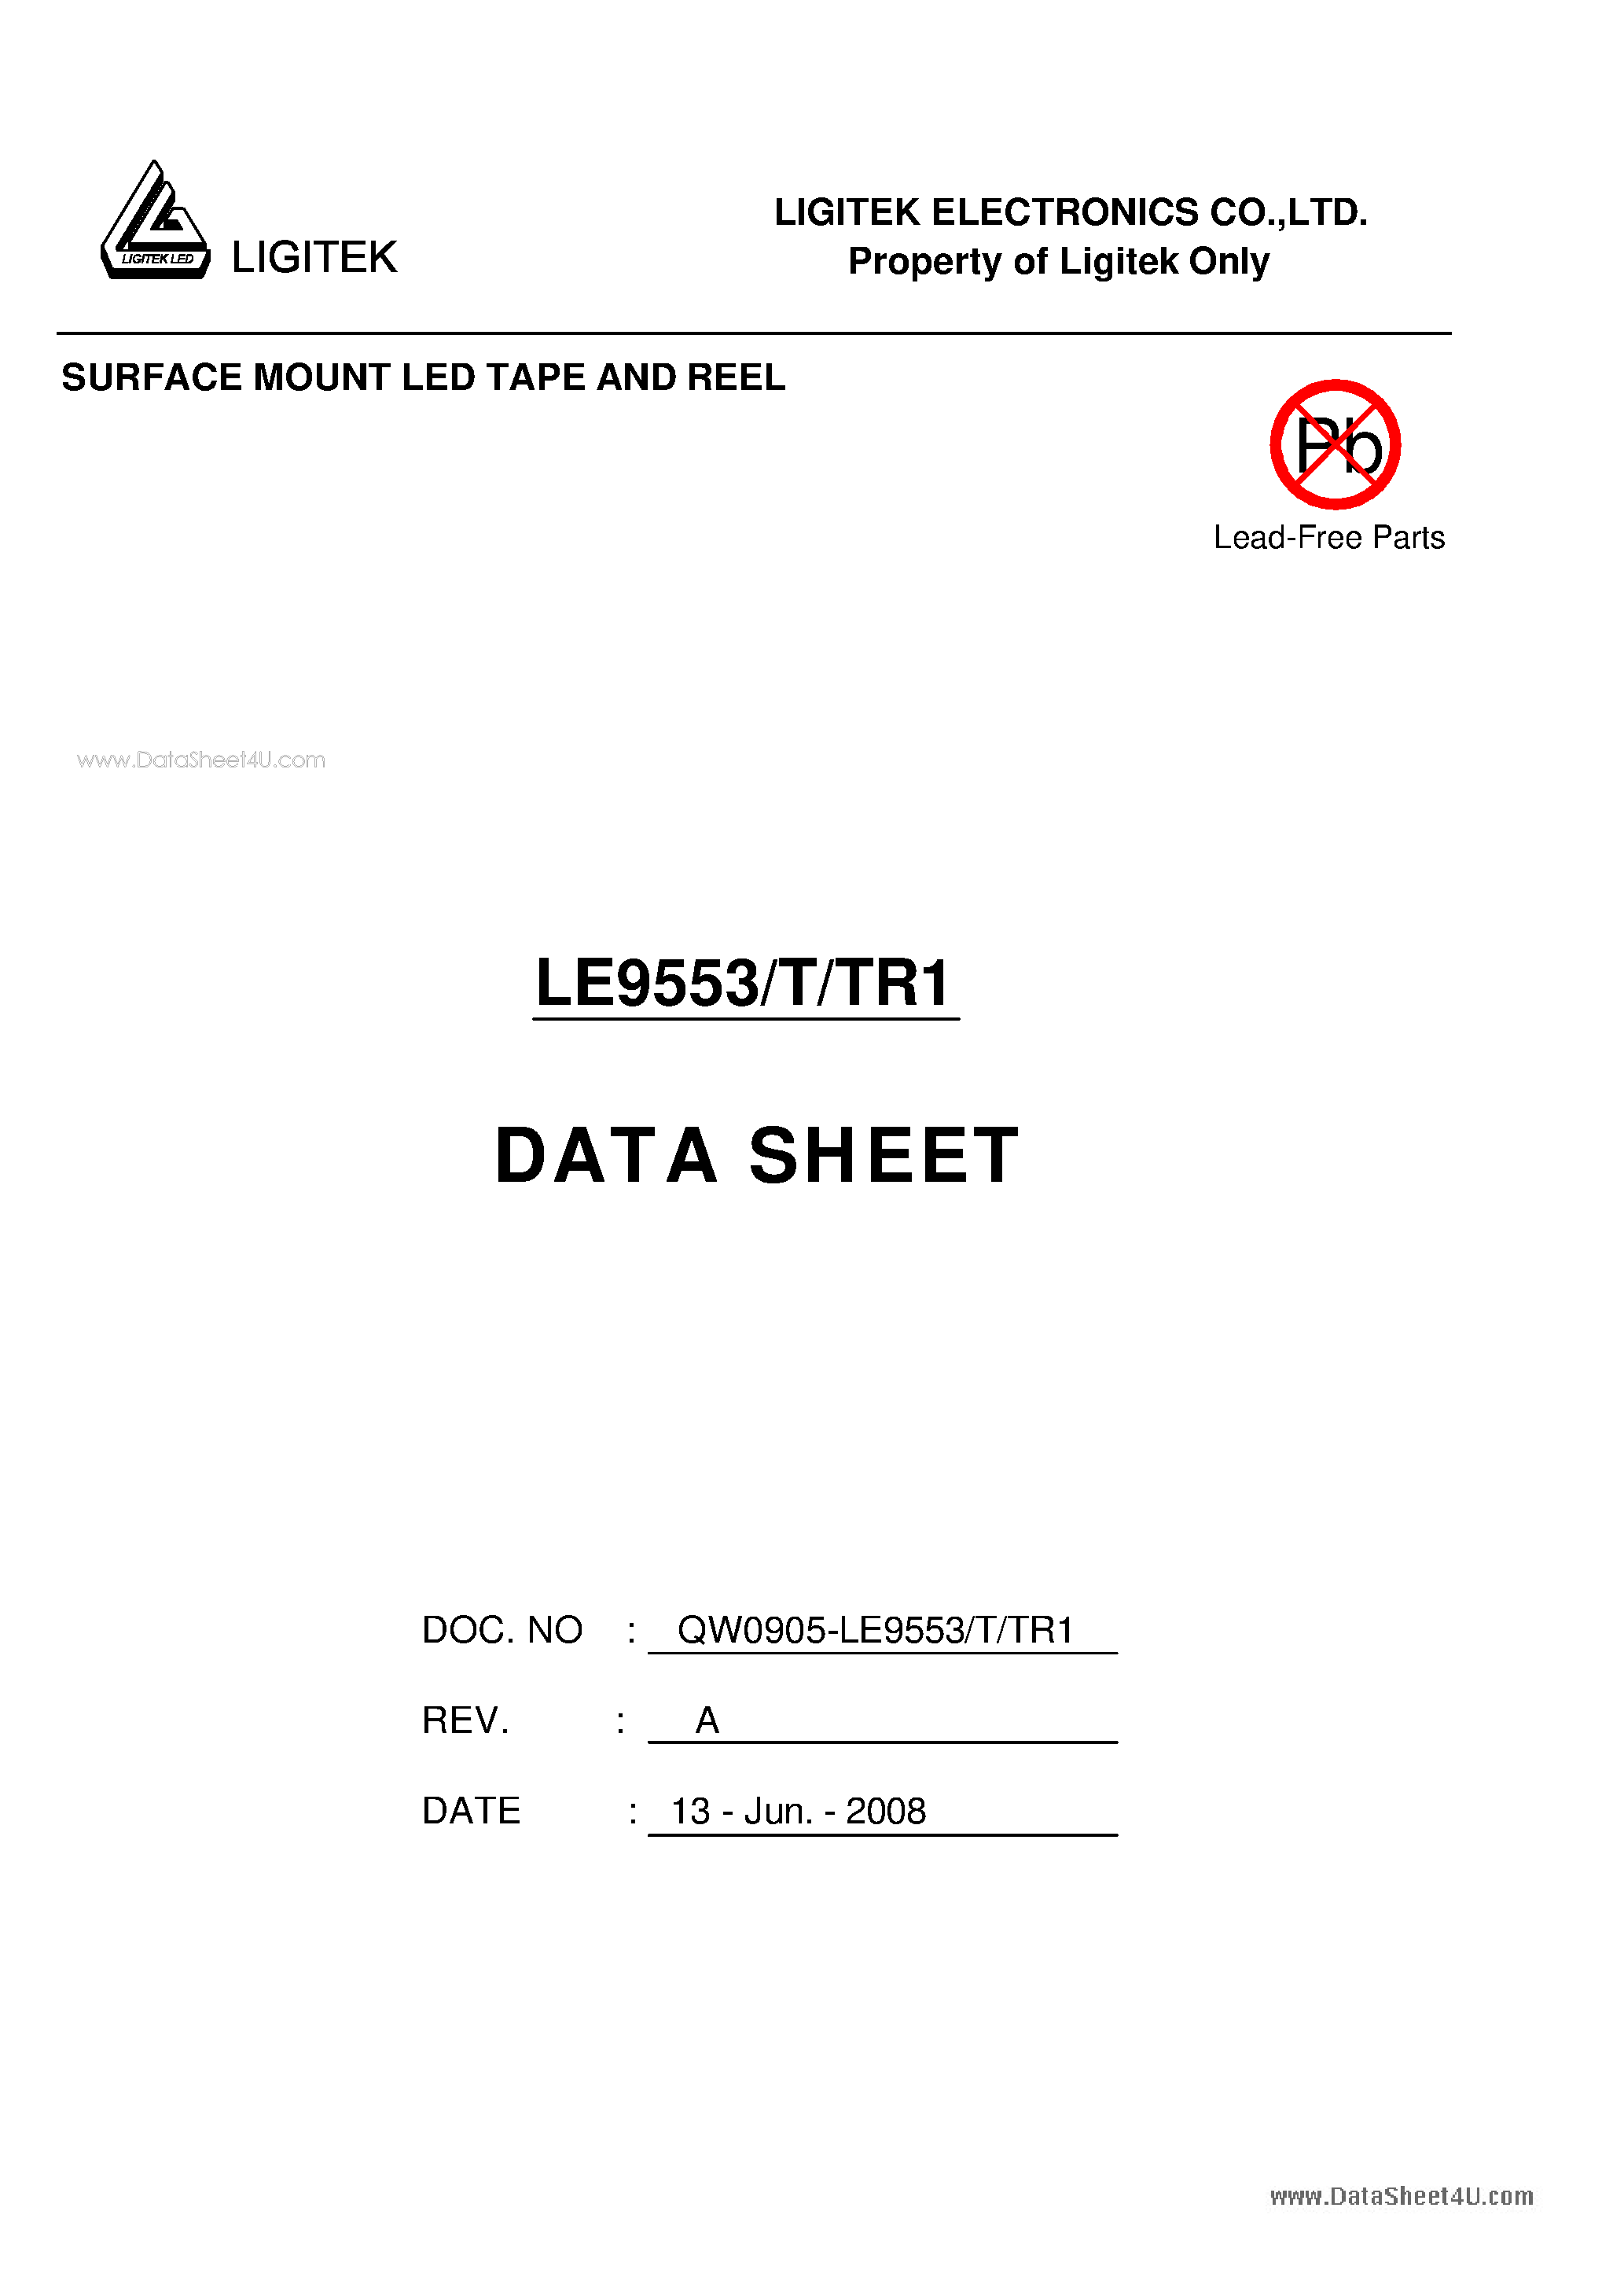 Datasheet LE9553/T/TR1 - SURFACE MOUNT LED TAPE AND REEL page 1